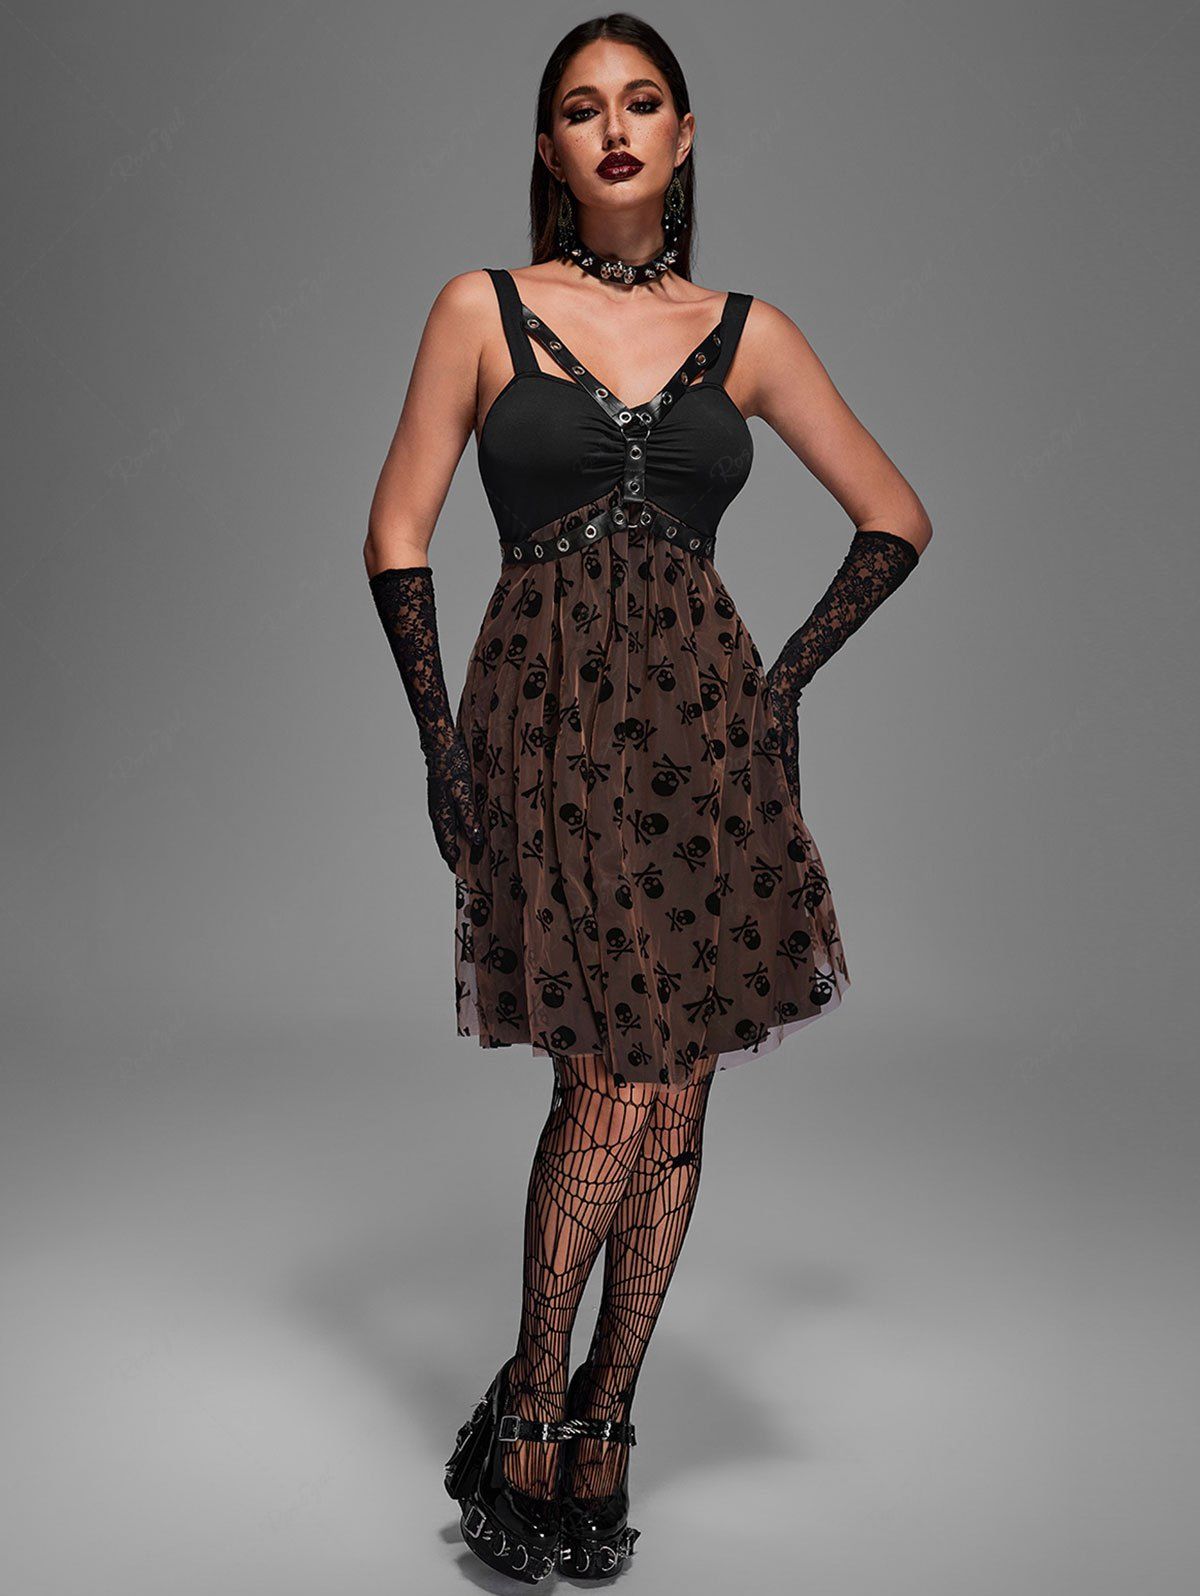 💗Tabbytragedy Loves💗 Gothic Steampunk Skull Print Mesh Grommets PU Leather Stripes Ruched Dress